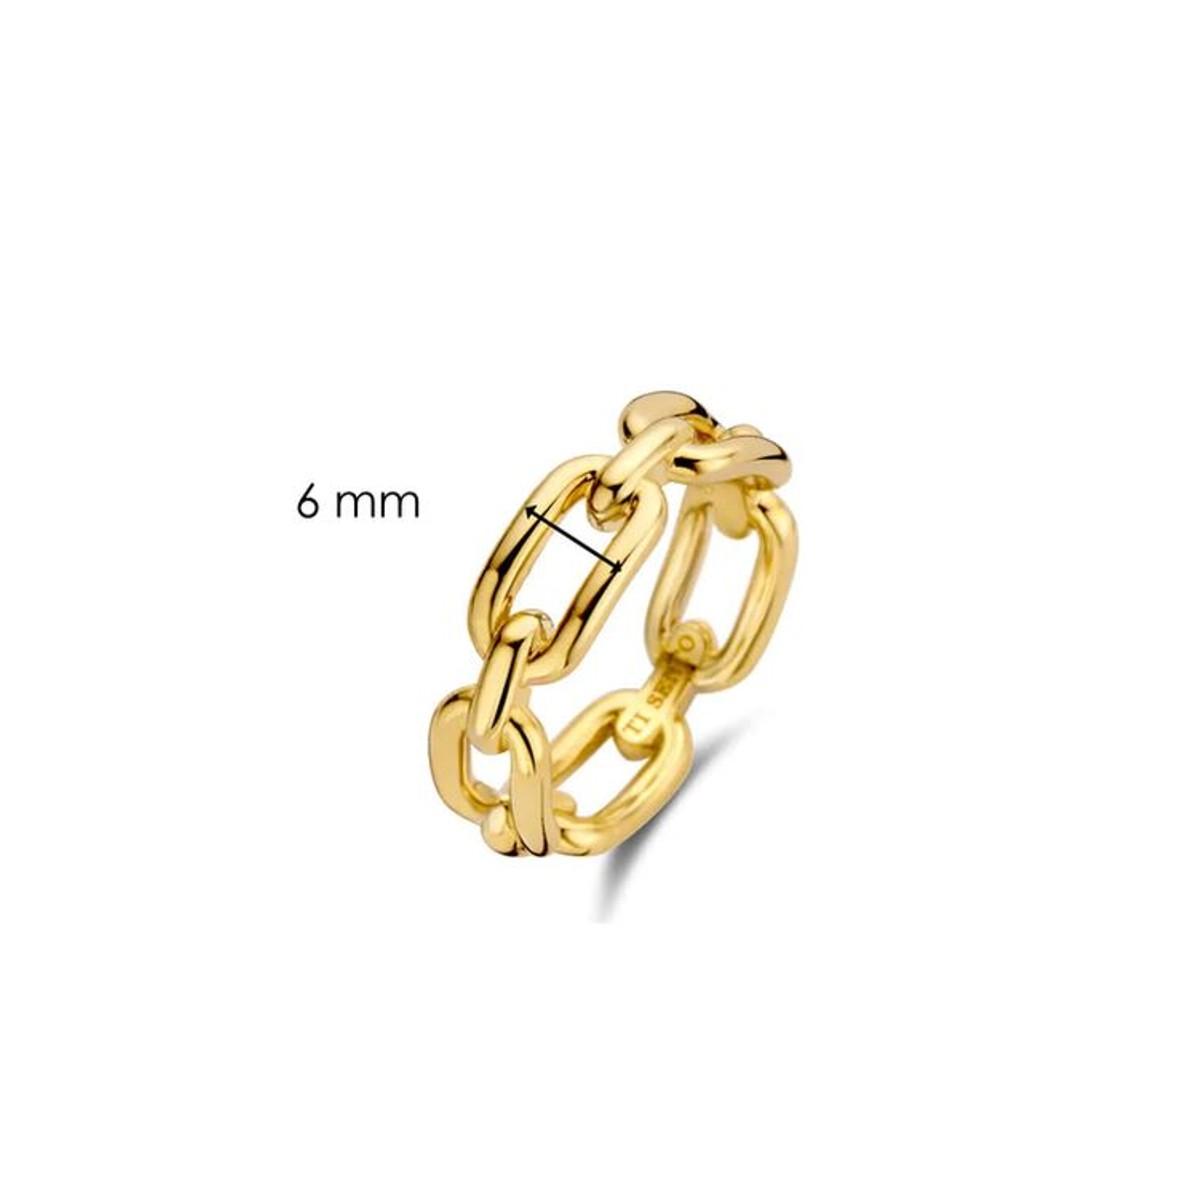 TI SENTO SILVER GOLD-PLATED RING 12205SY SIZE 14